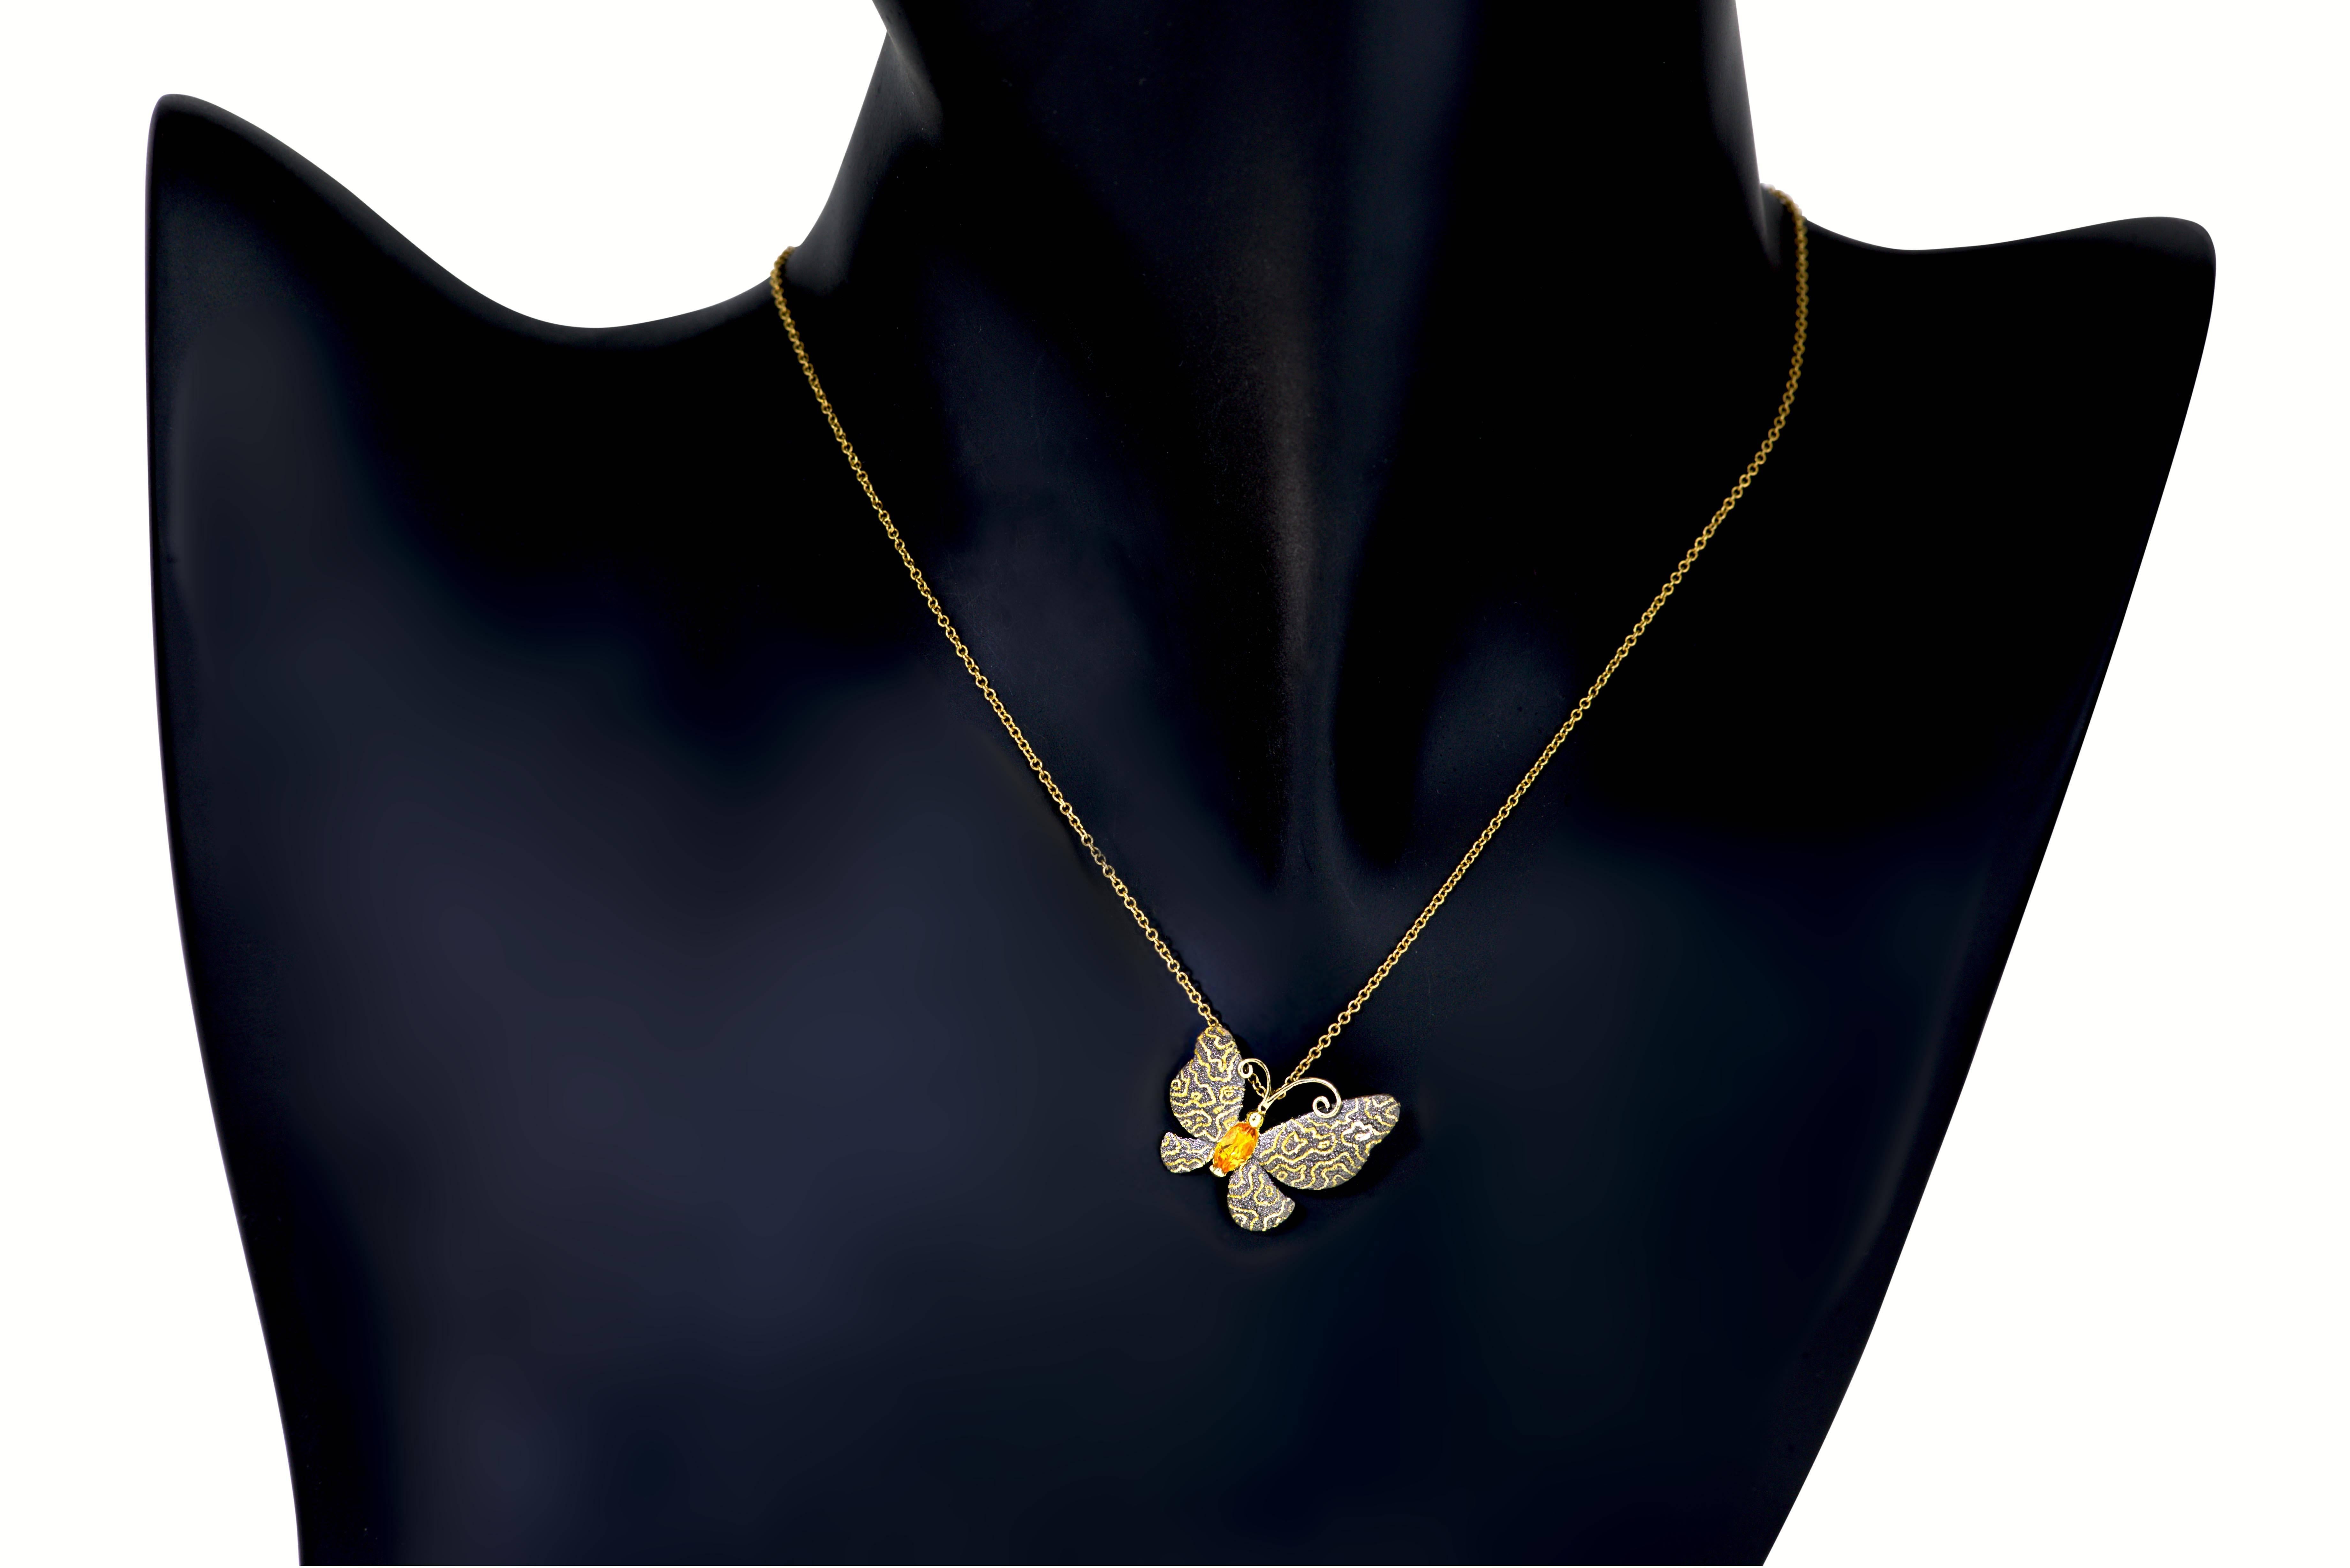 Citrine Gold Butterfly Hand-Textured Pendant Necklace Pin on Chain im Zustand „Neu“ im Angebot in New York, NY